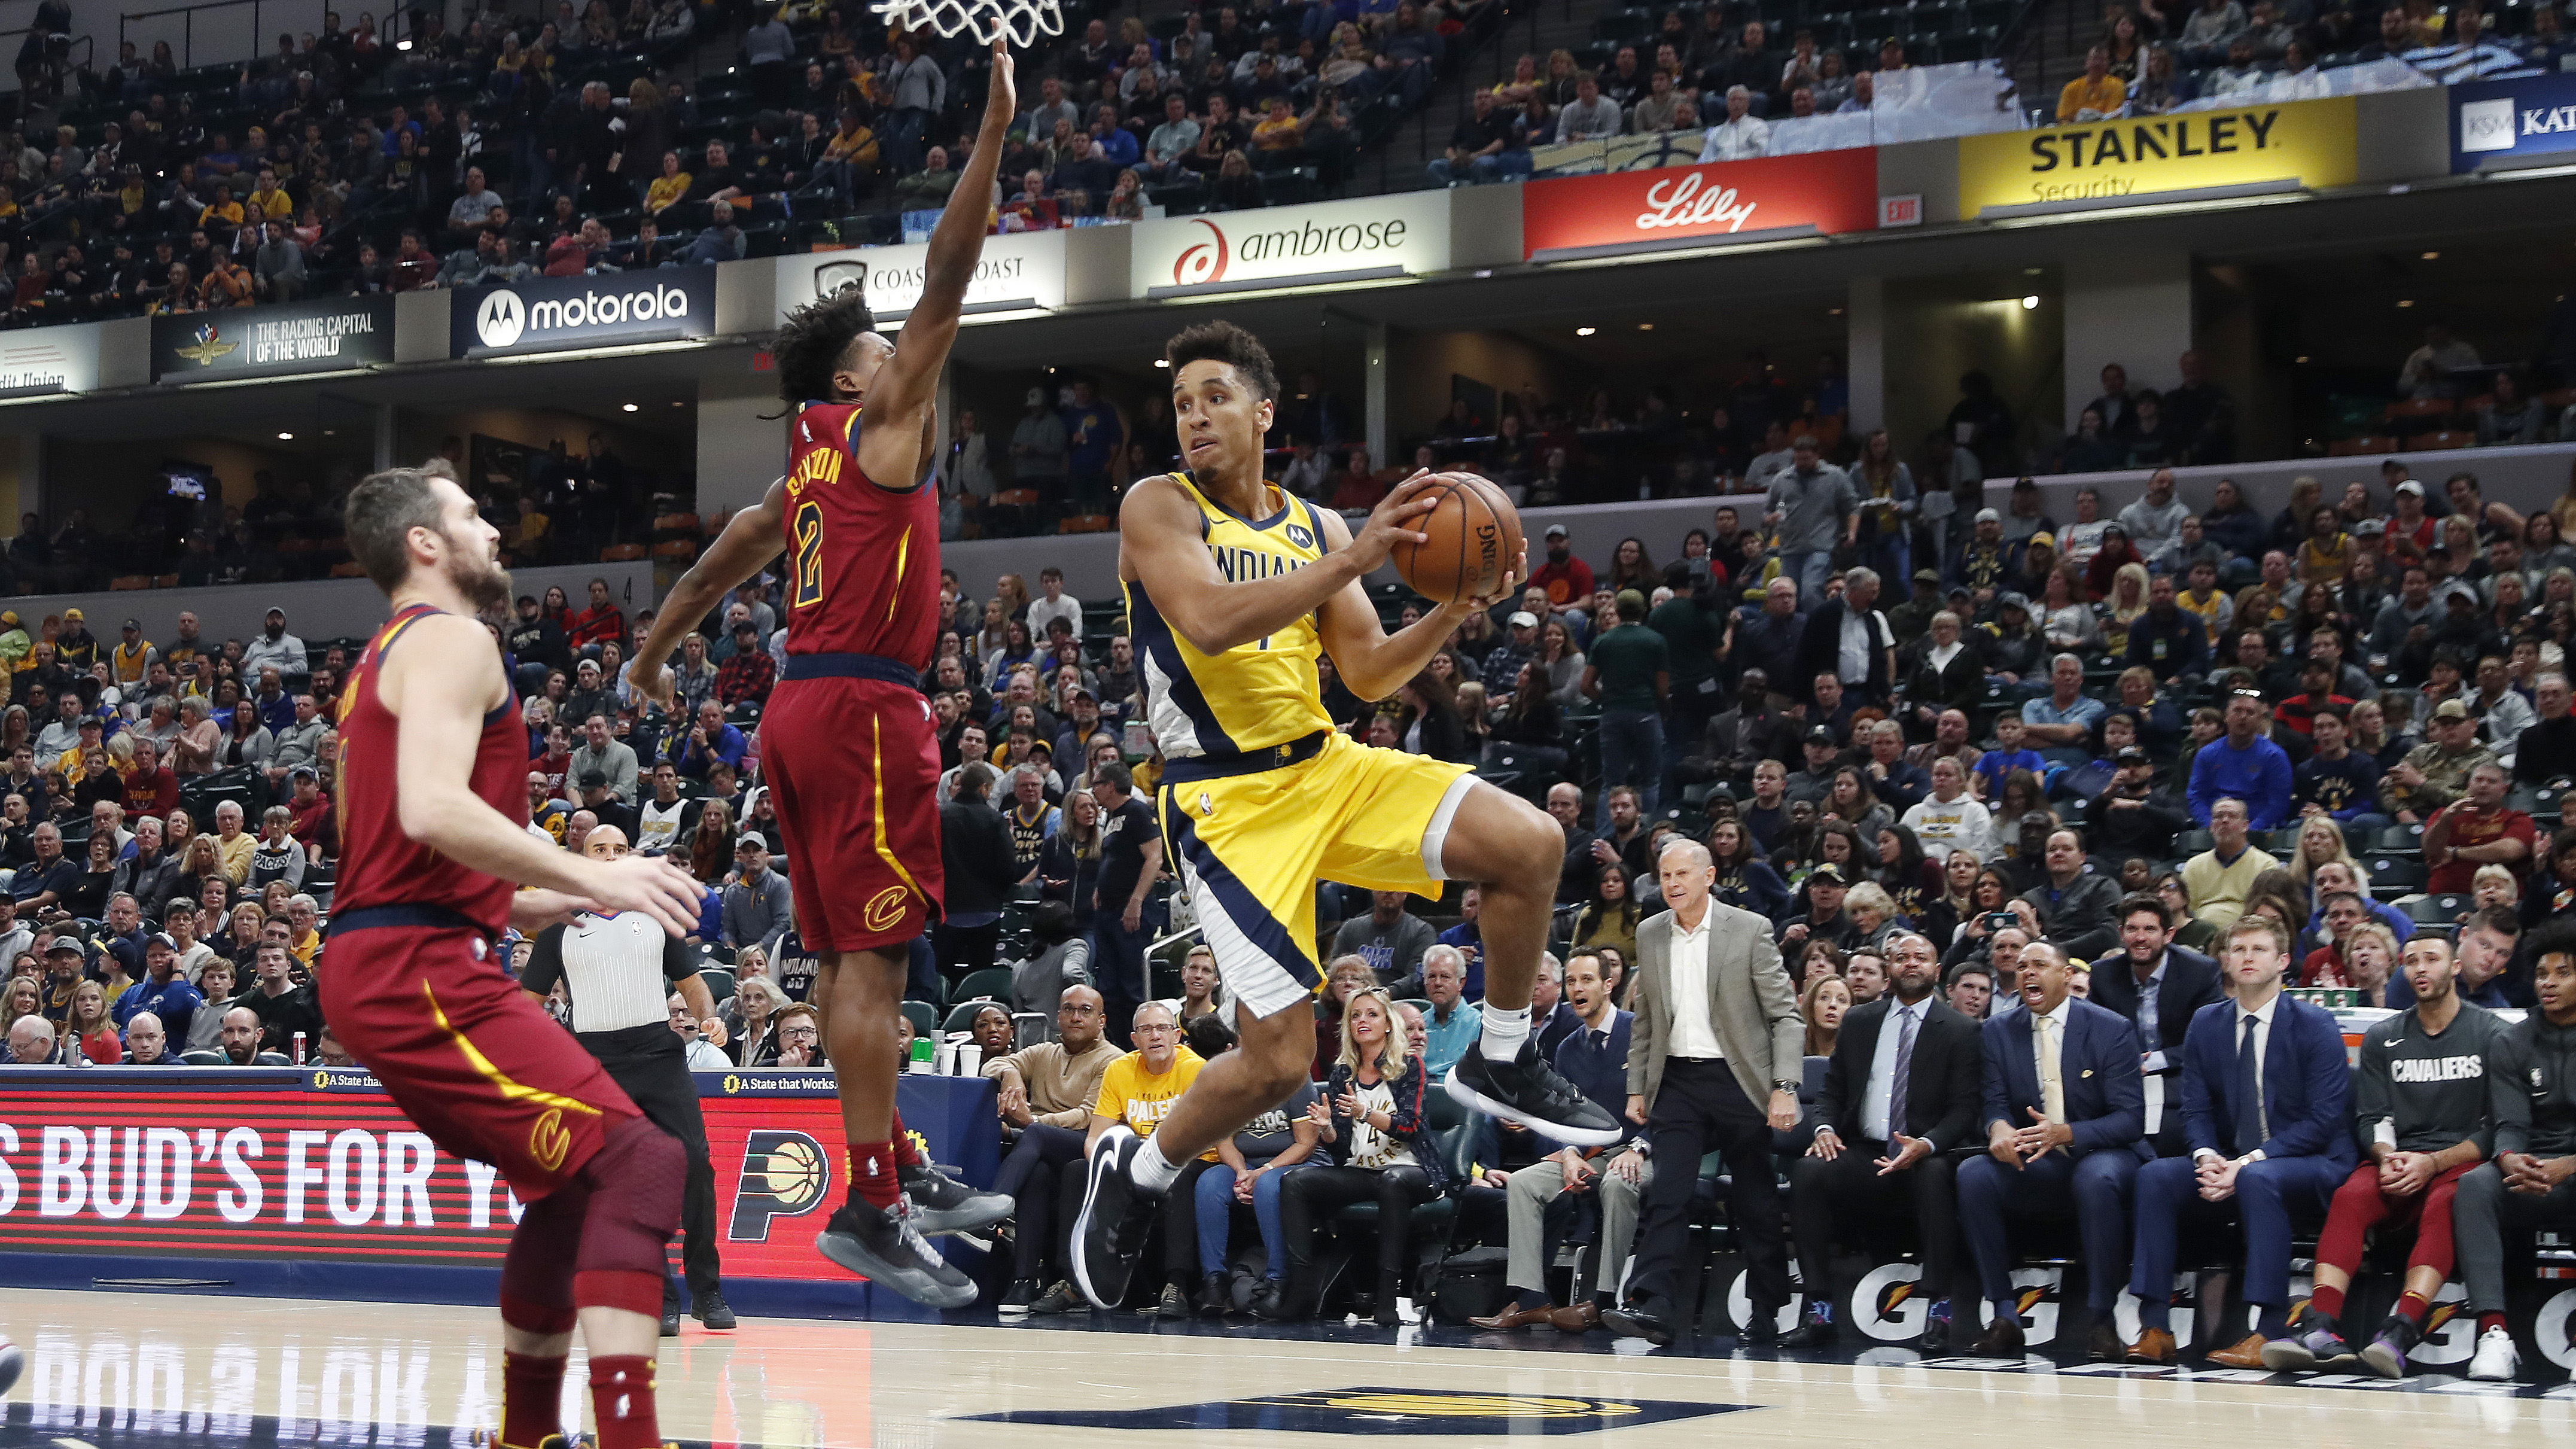 Pacers earn first home victory, 102-95 over Cavaliers